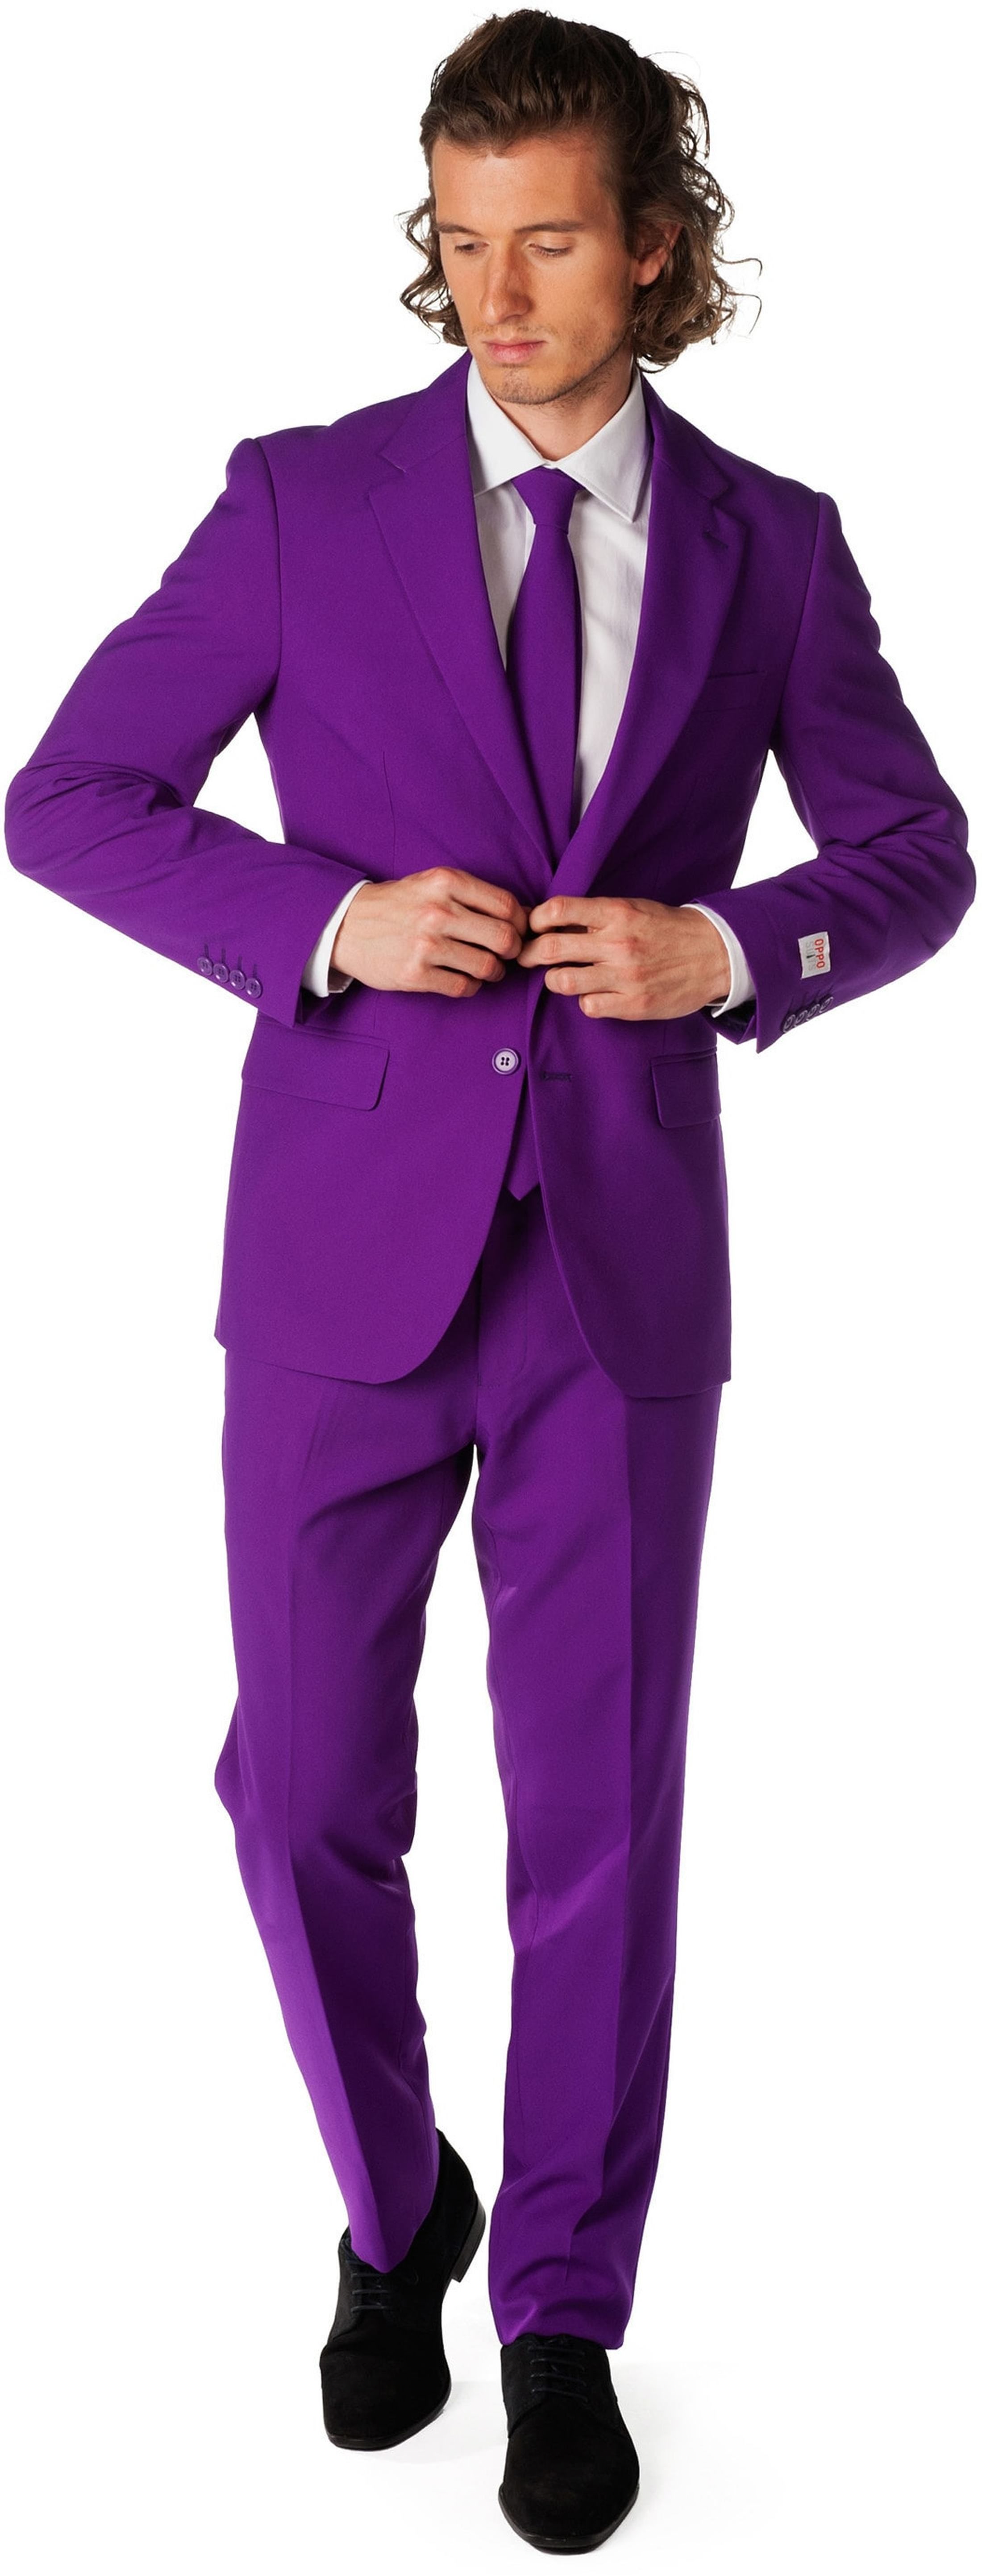 OppoSuits Costume Prince Violet taille 50